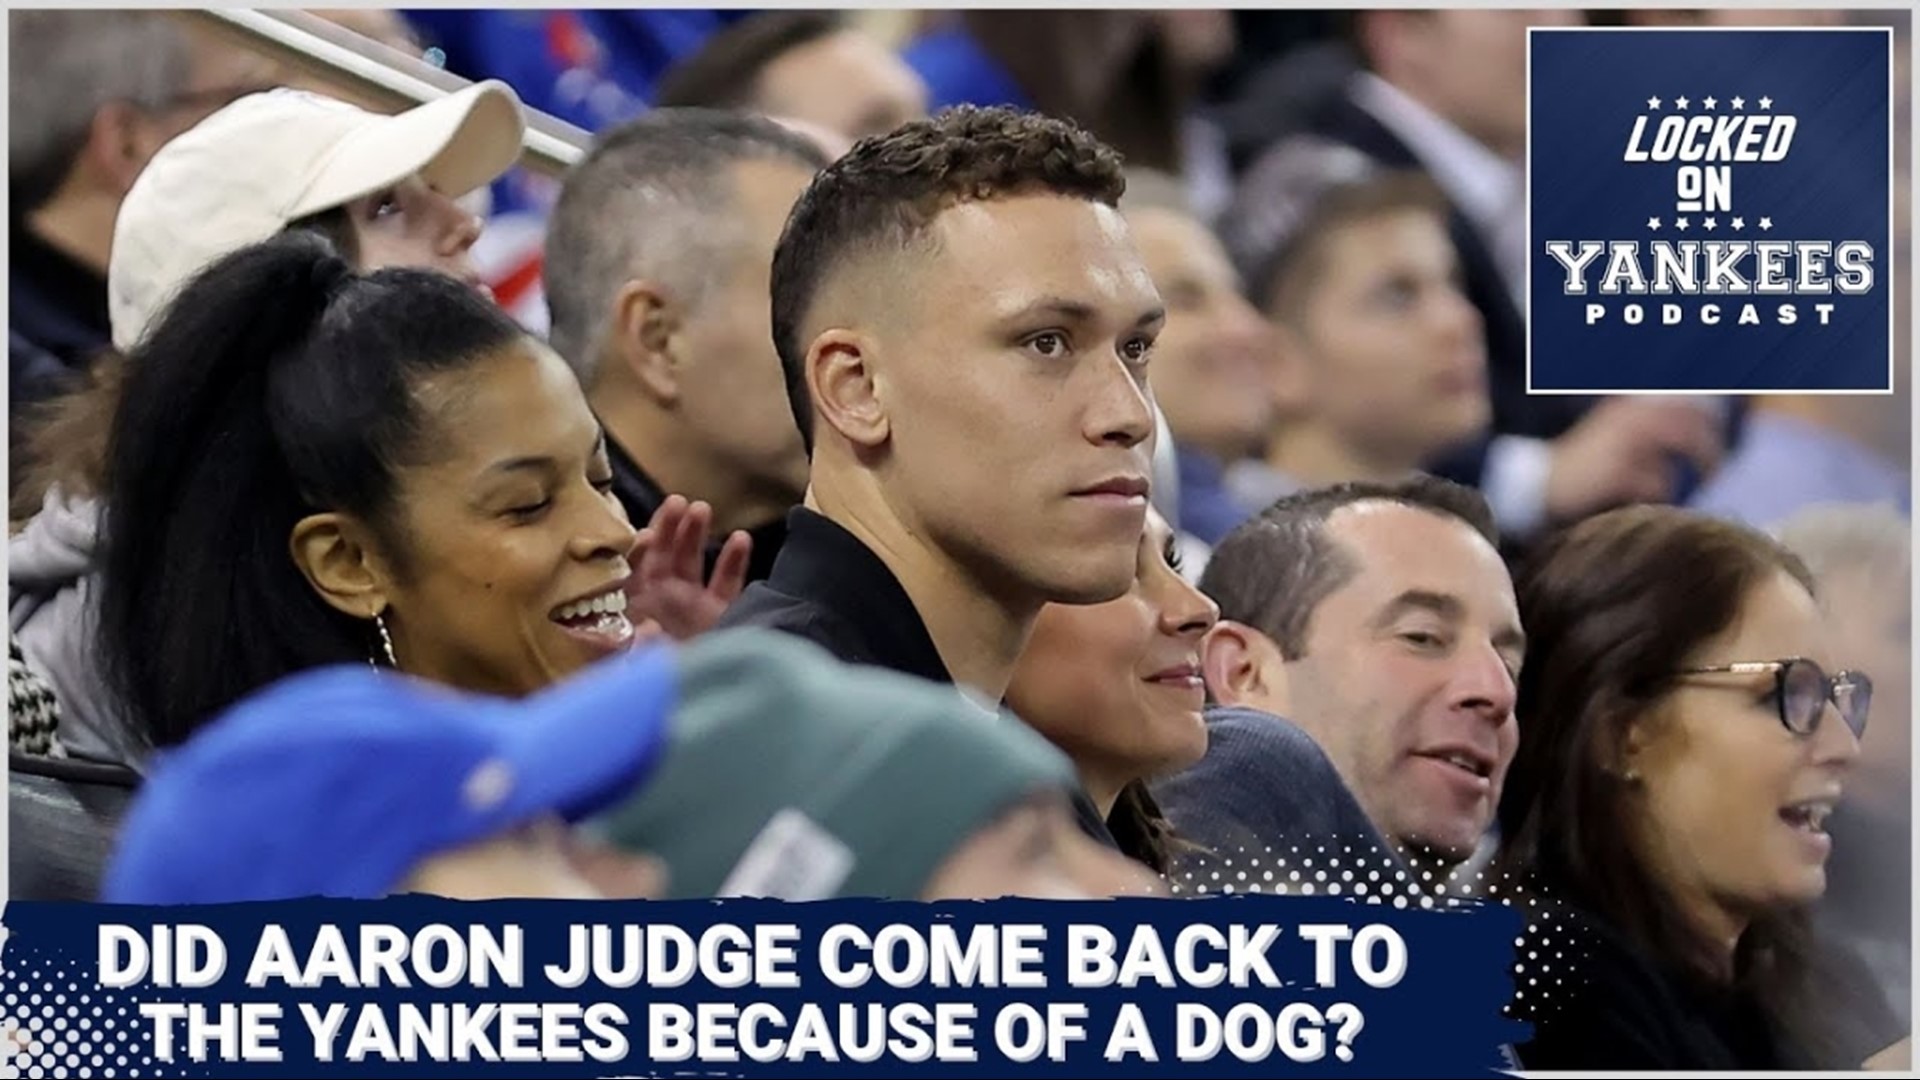 Aaron Judge was on the Tonight Show where he told the story of Anthony Rizzo persuading him to stay with the Yankees by bringing up how their dogs, Kevin and Penny.